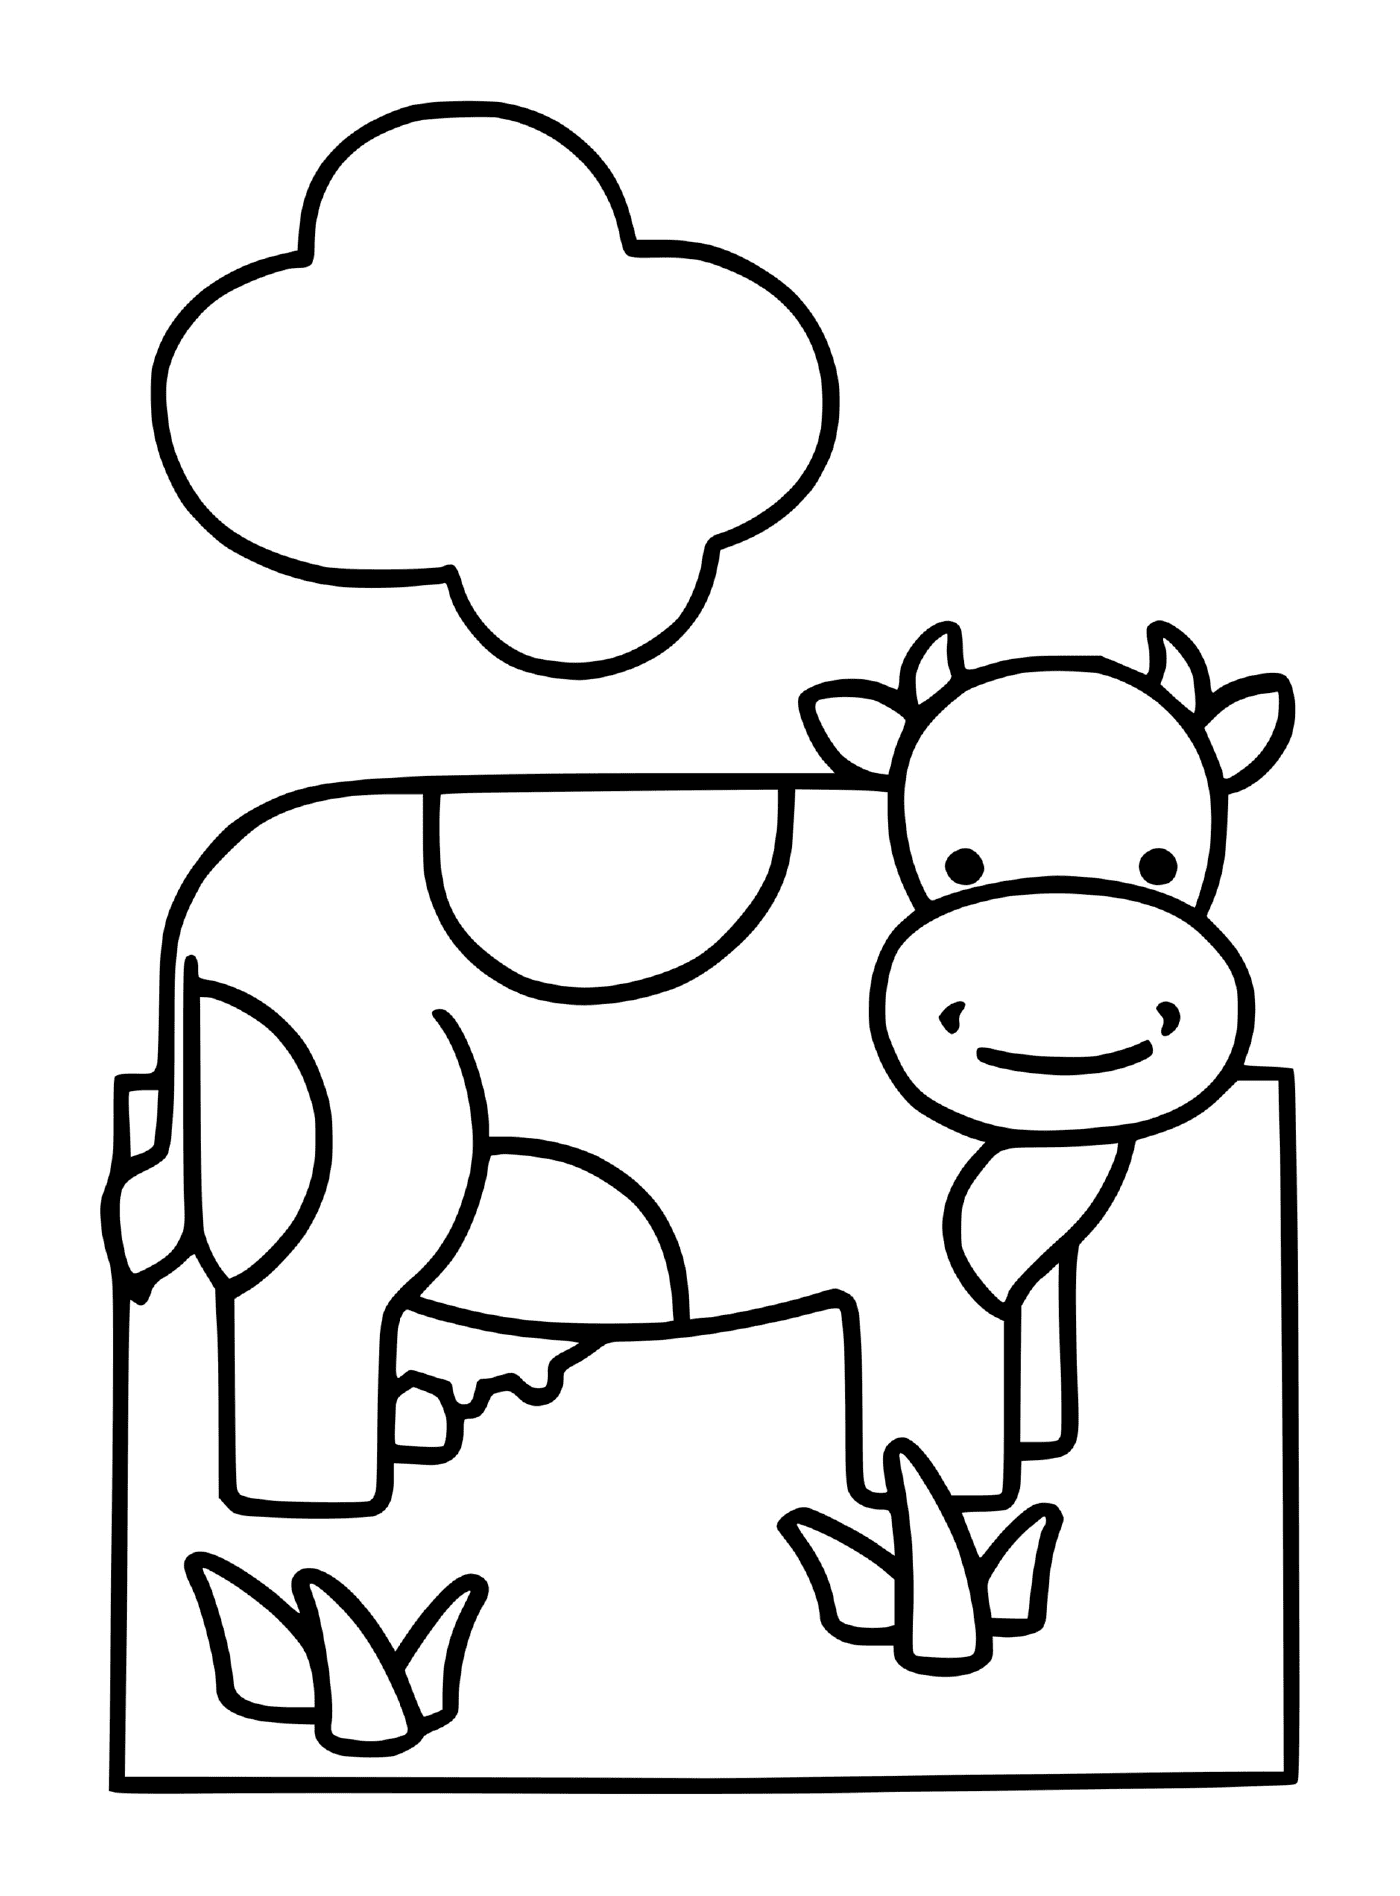  Cow in a farm with cloud 